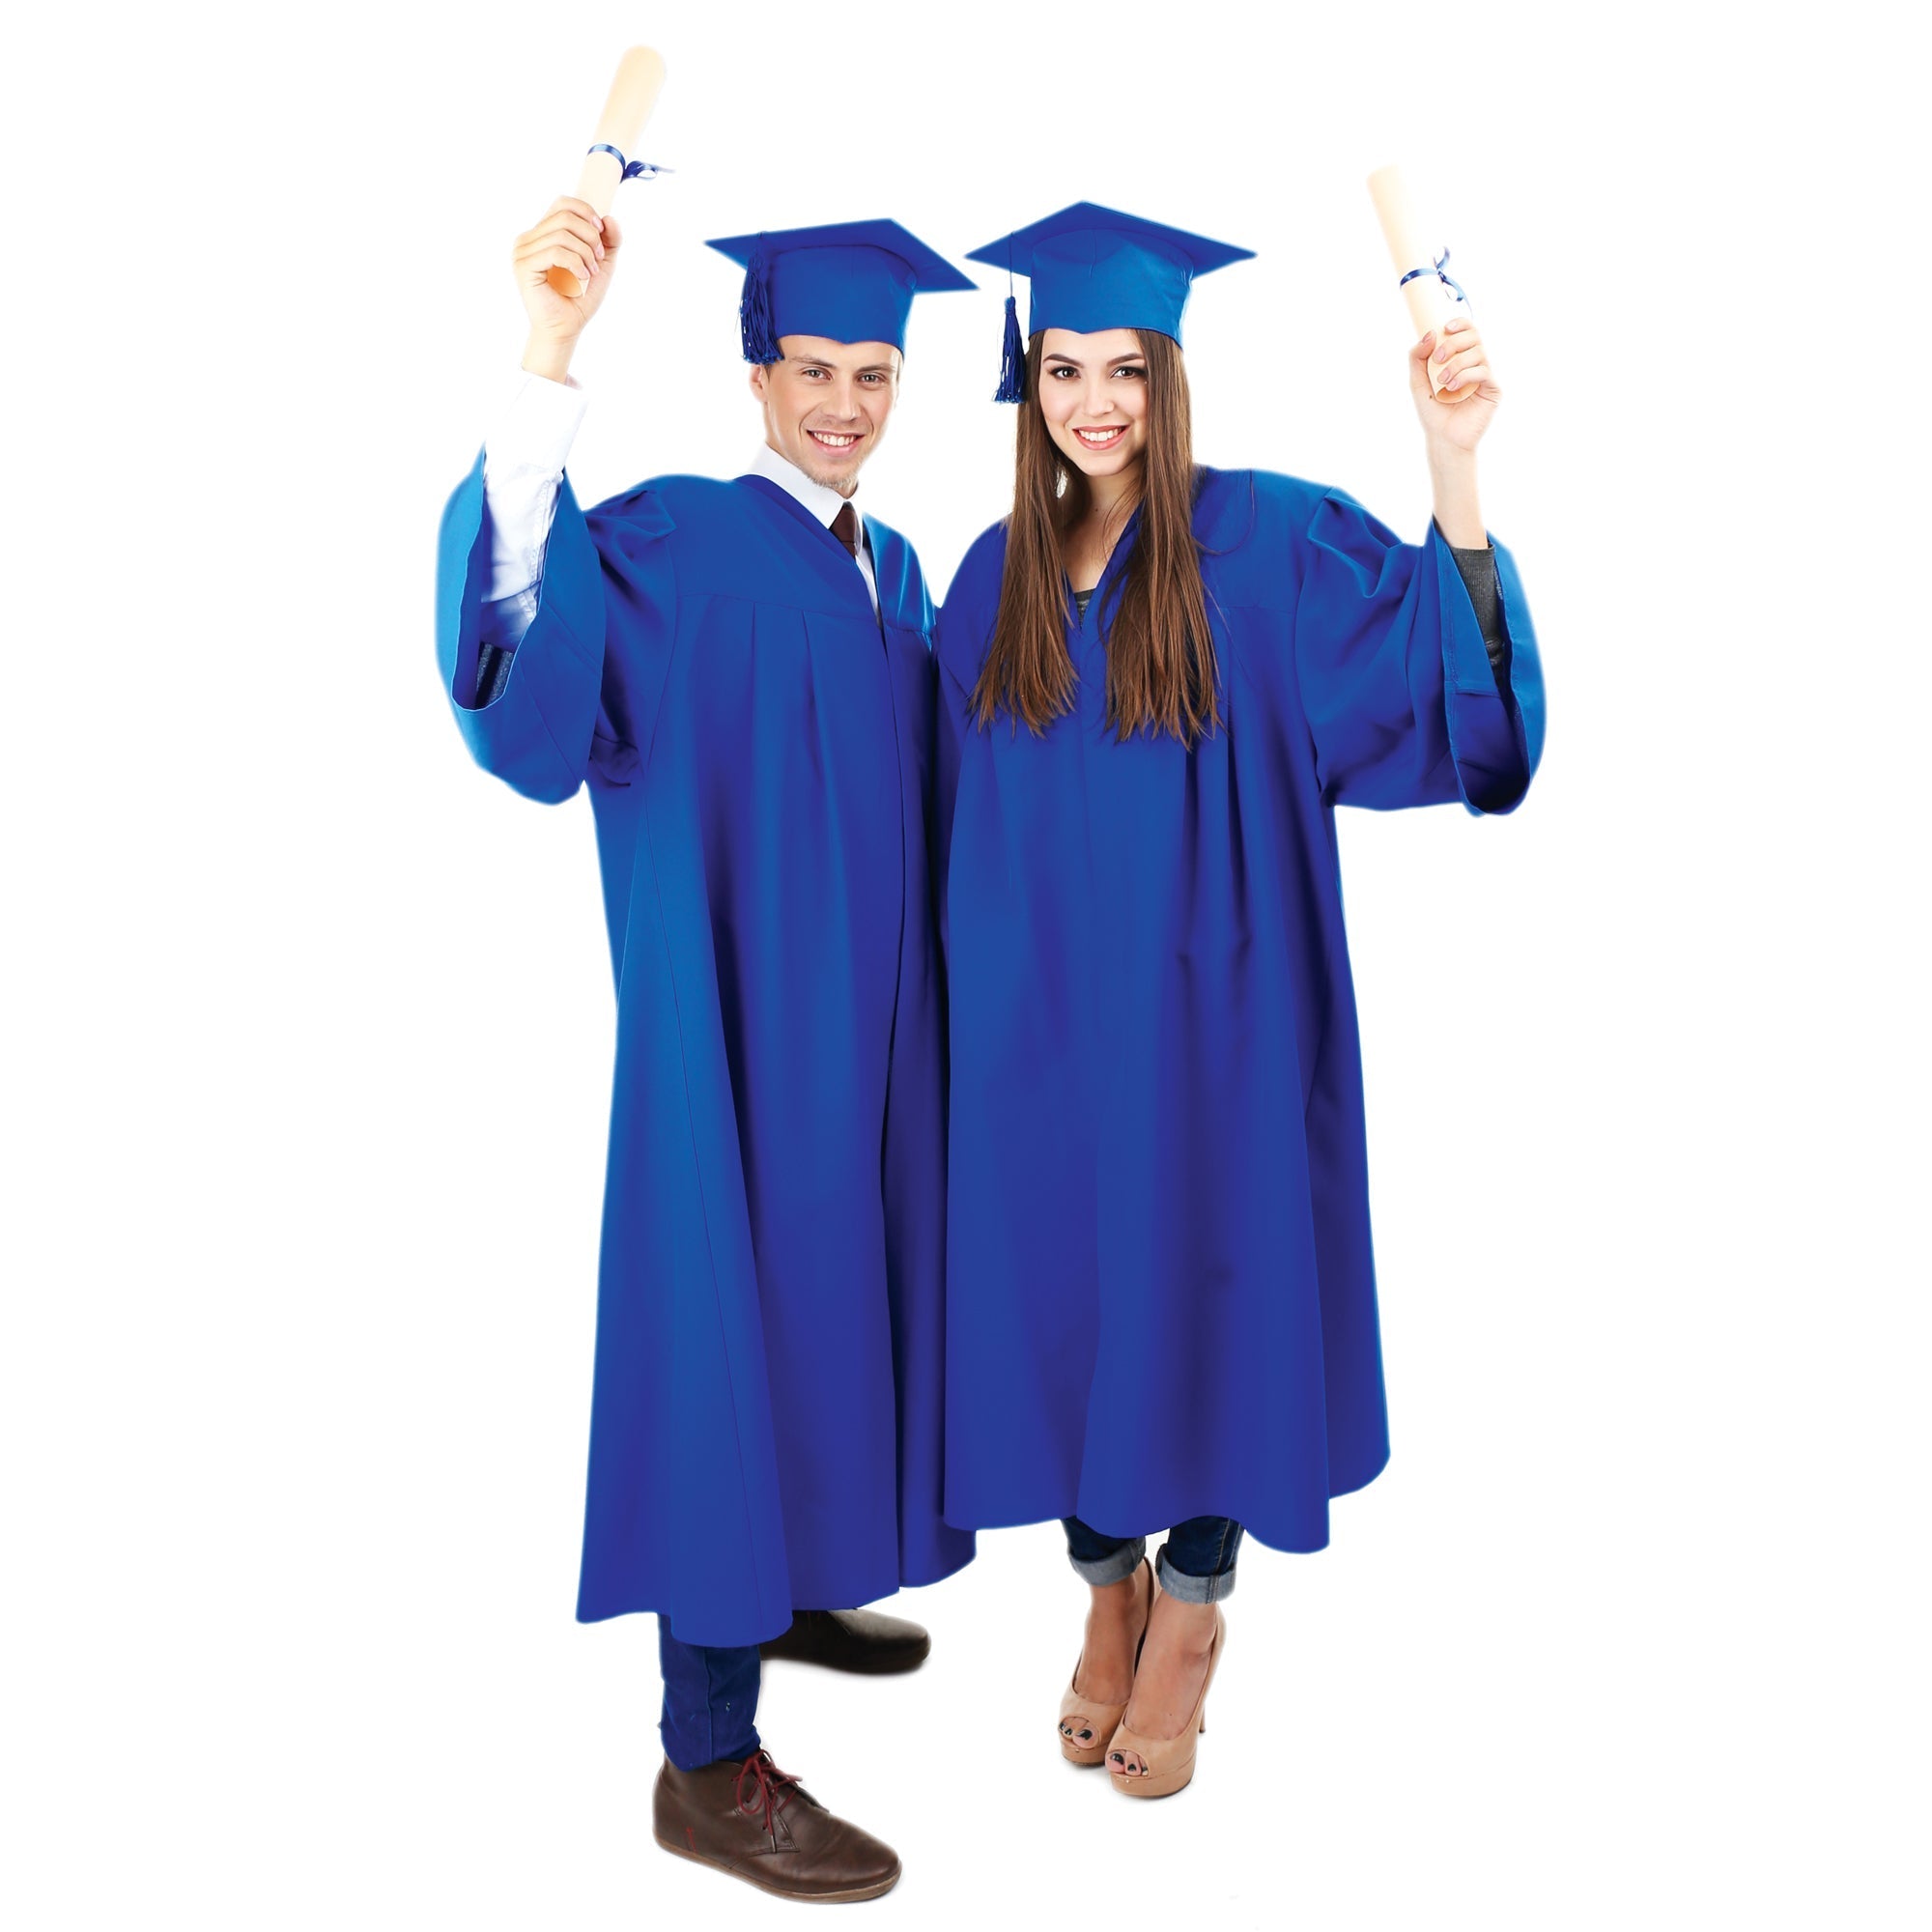 Royal Blue Graduation Gown with Hat for Adults